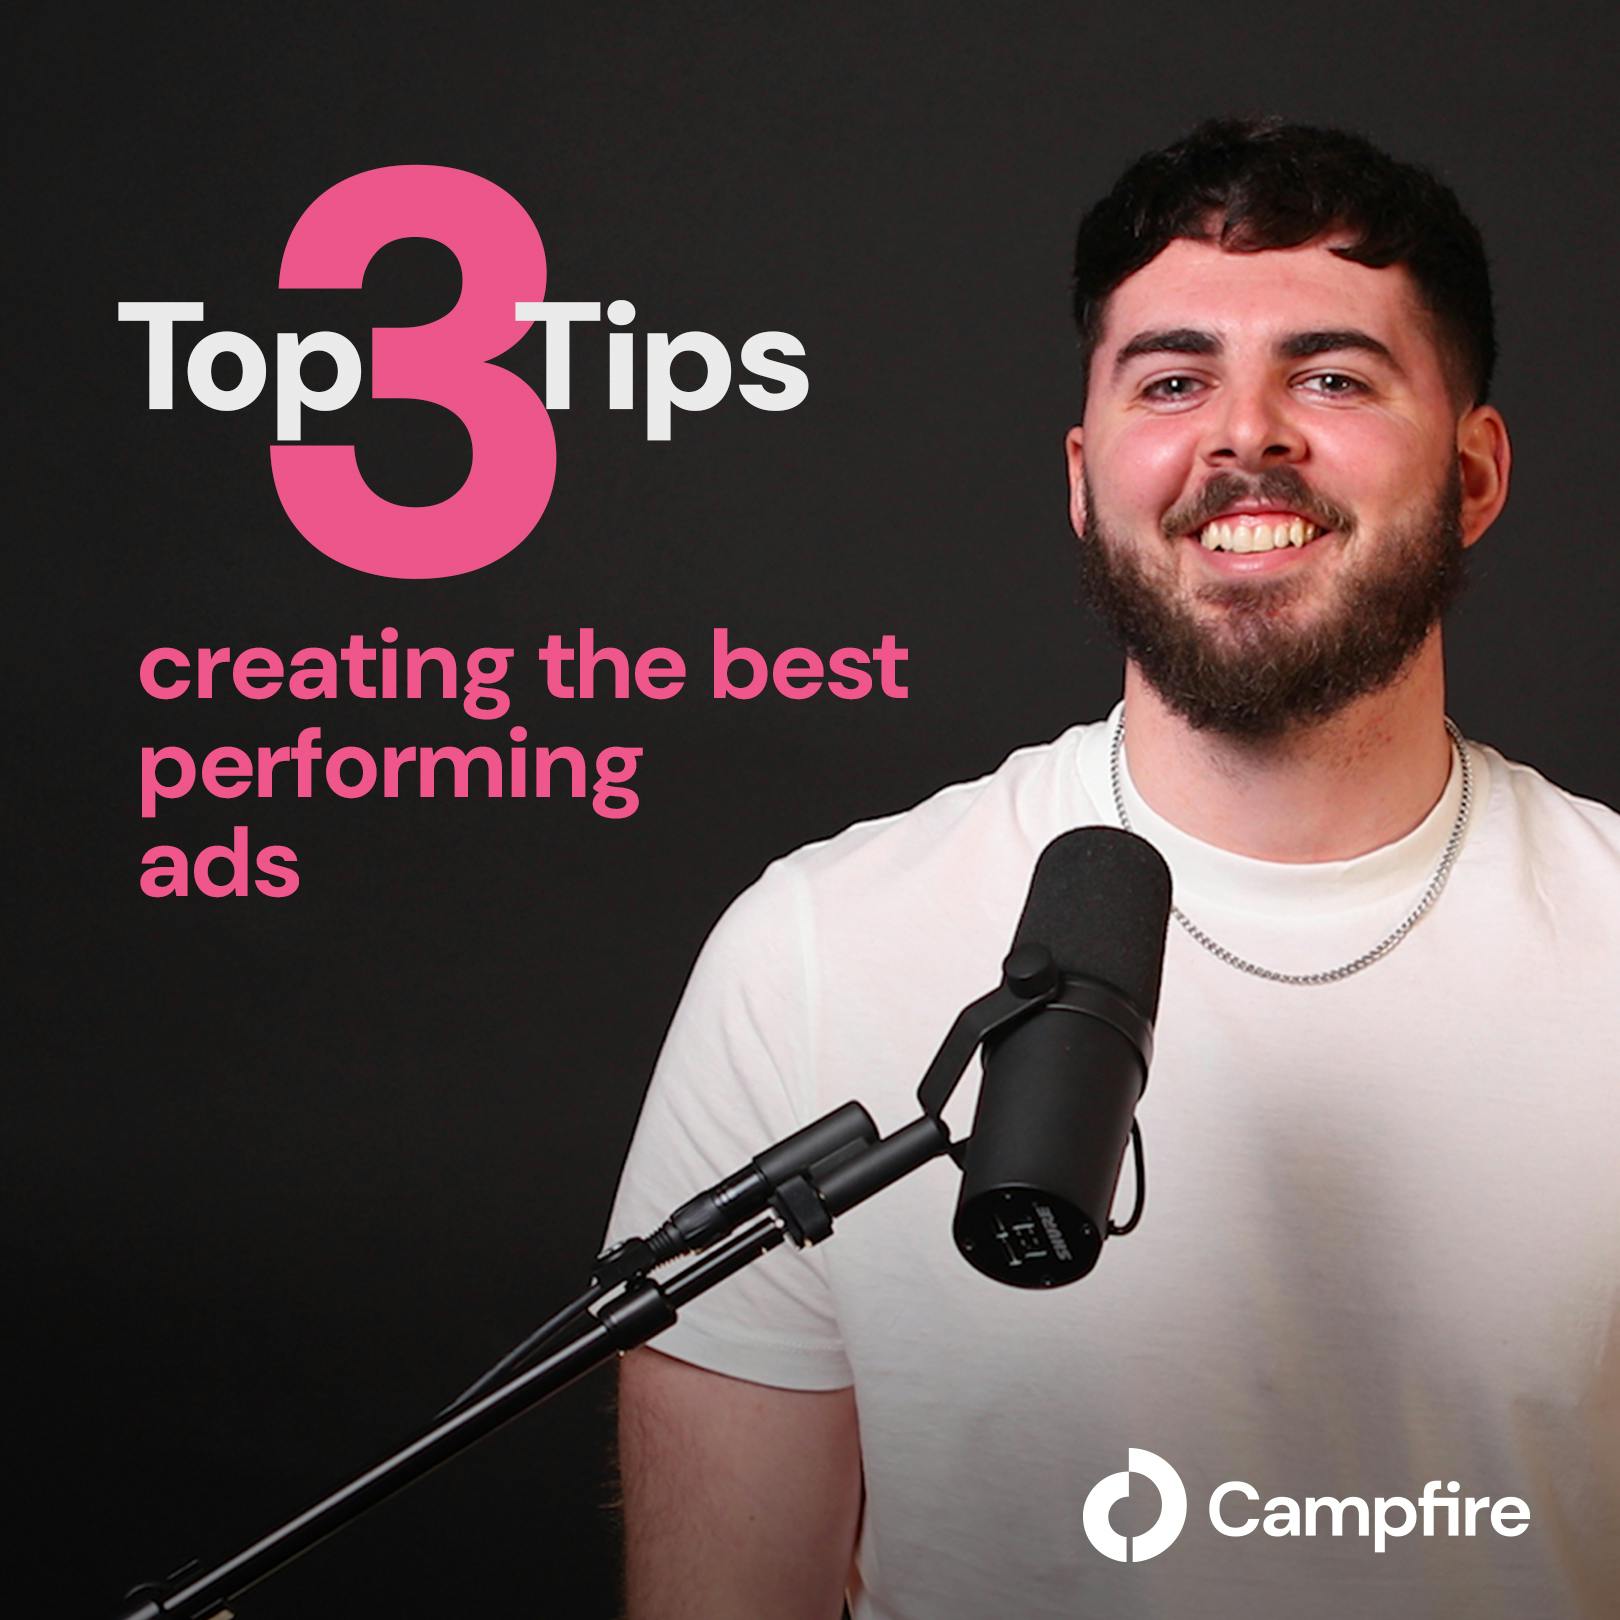 Top 3 Tips On Creating The Best Performing Ads